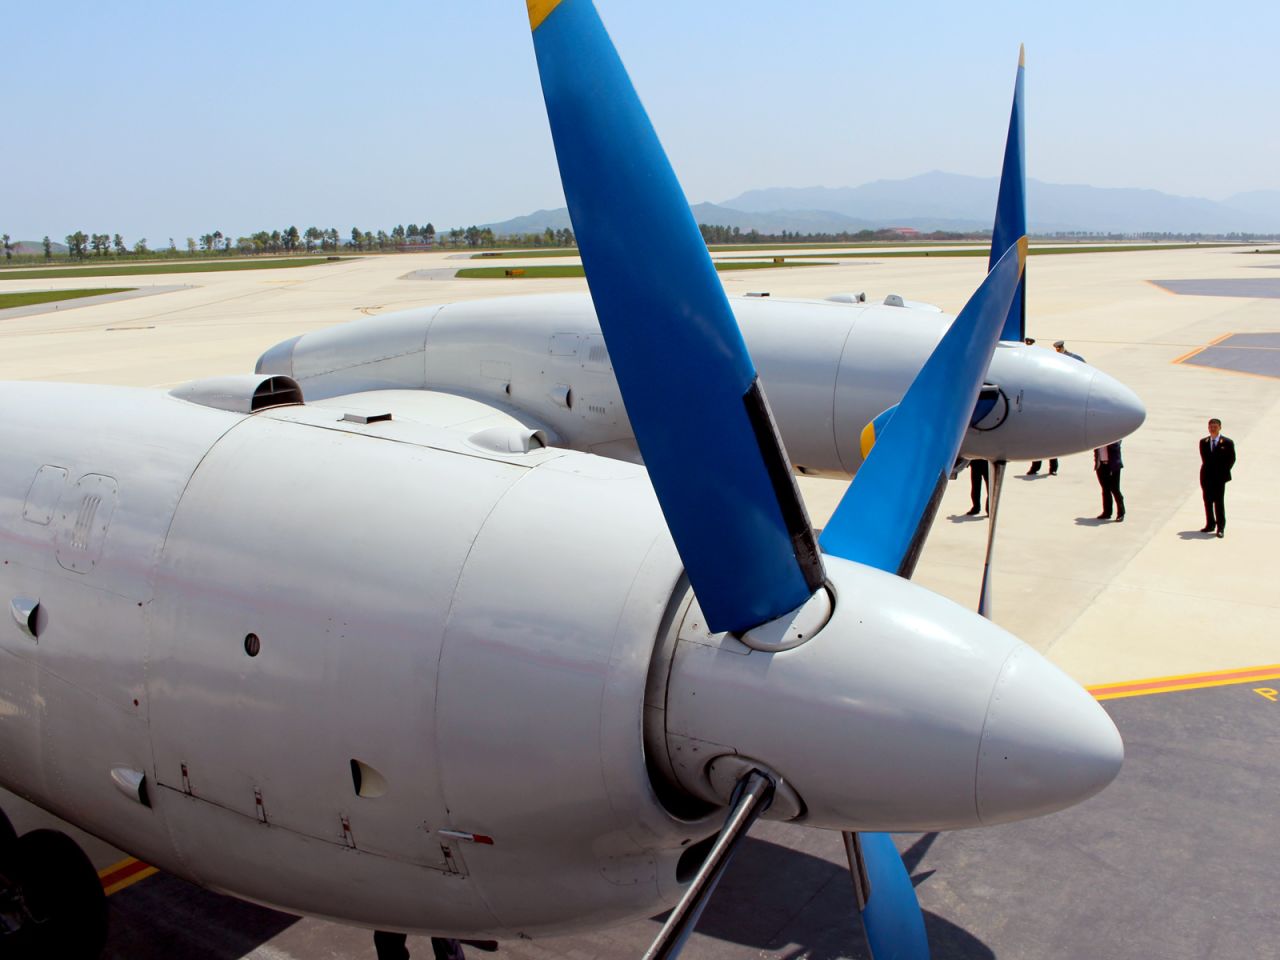 Check out its blue, Soviet Cold War-era propellers. During flight, they were incredibly quiet and stable.